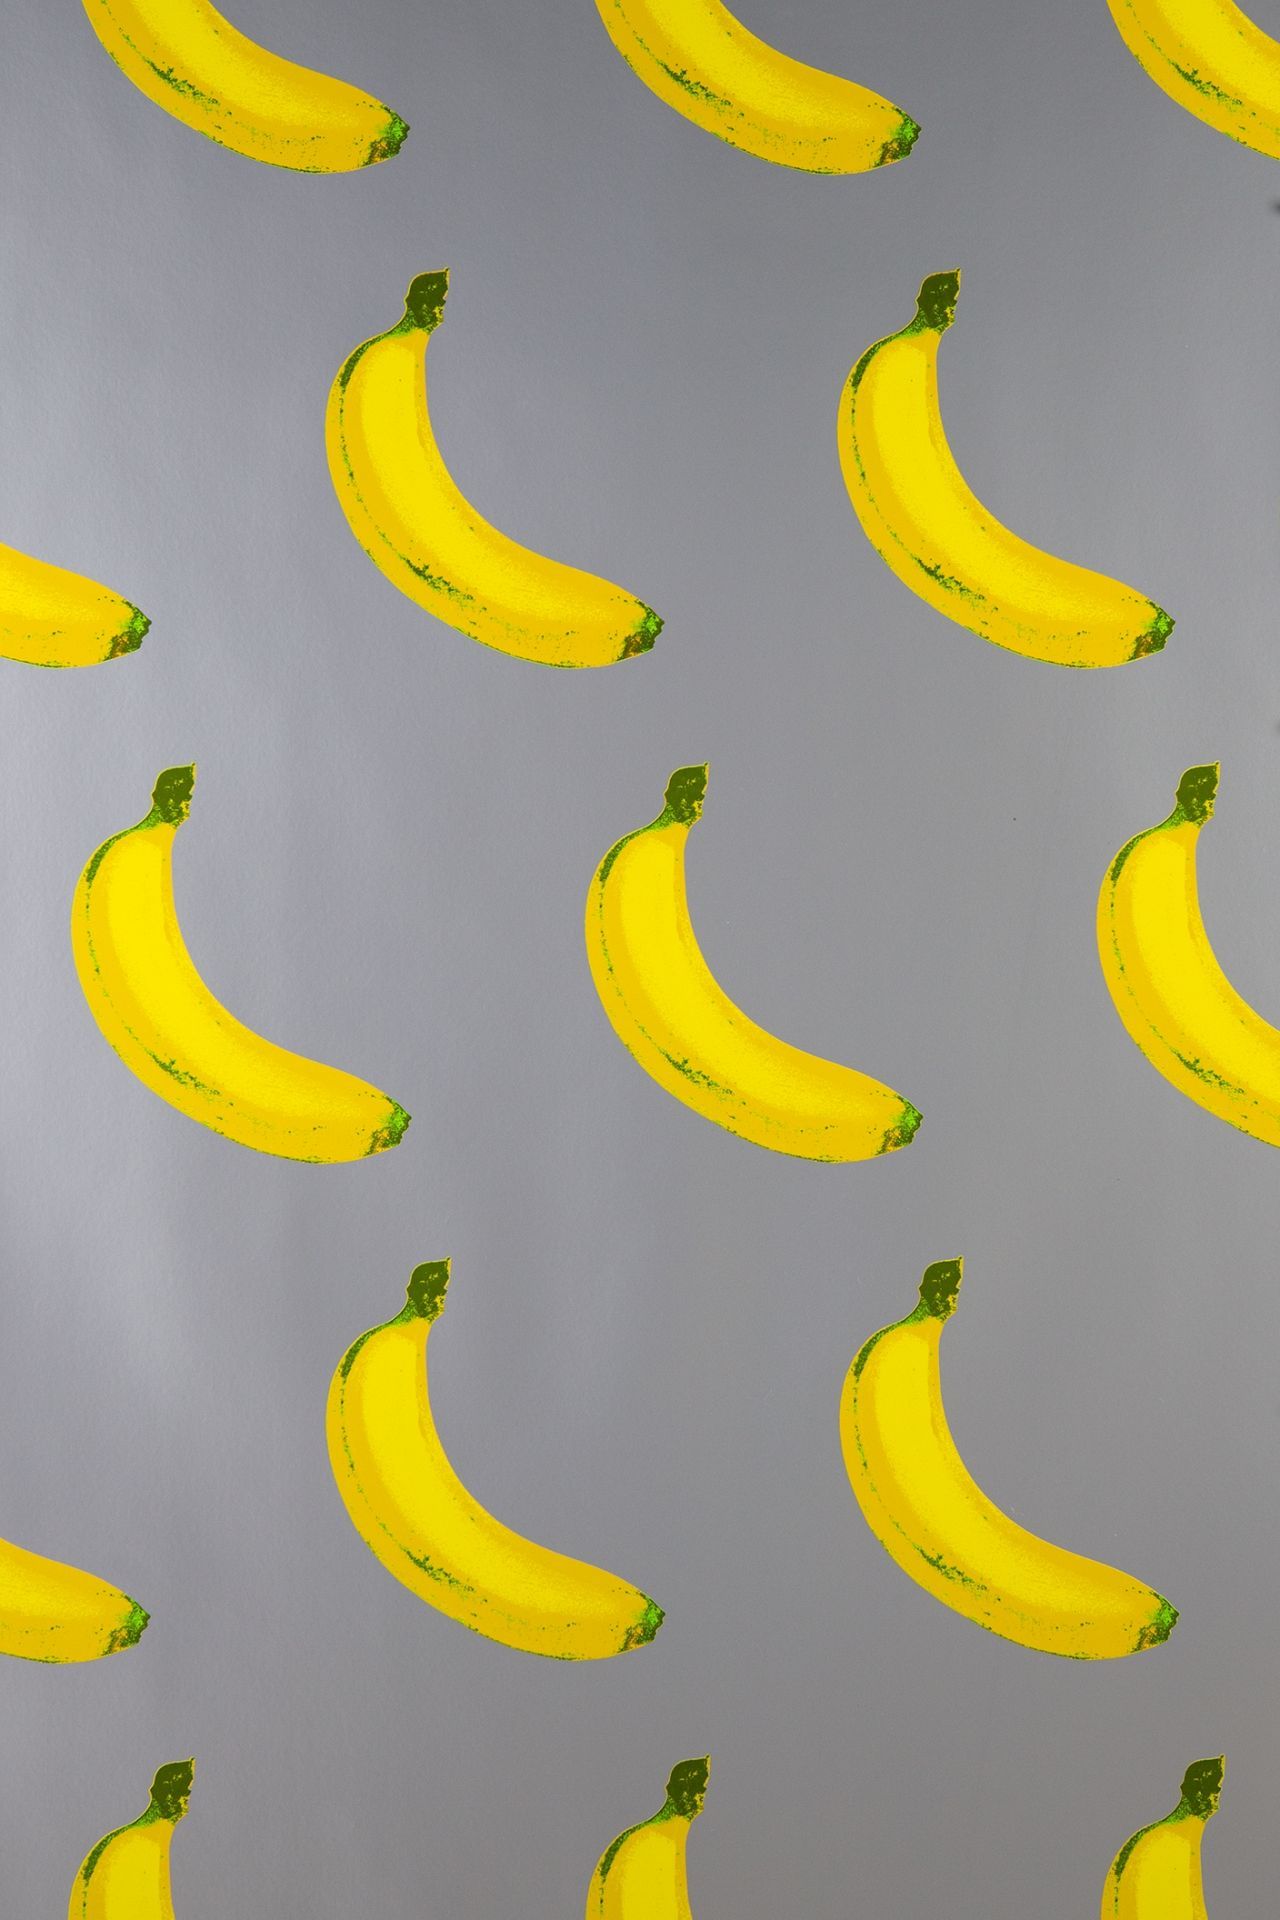 SIGN EVER Banana Fruits Kitchen Wallpapers Home Water Proof Oil Proof Heat  Resistant Fresh Fruits Wallpaper Kitchen Wall Stickers Coverings Area  Dinning Room L x H 60 Cm X 45 Cm 